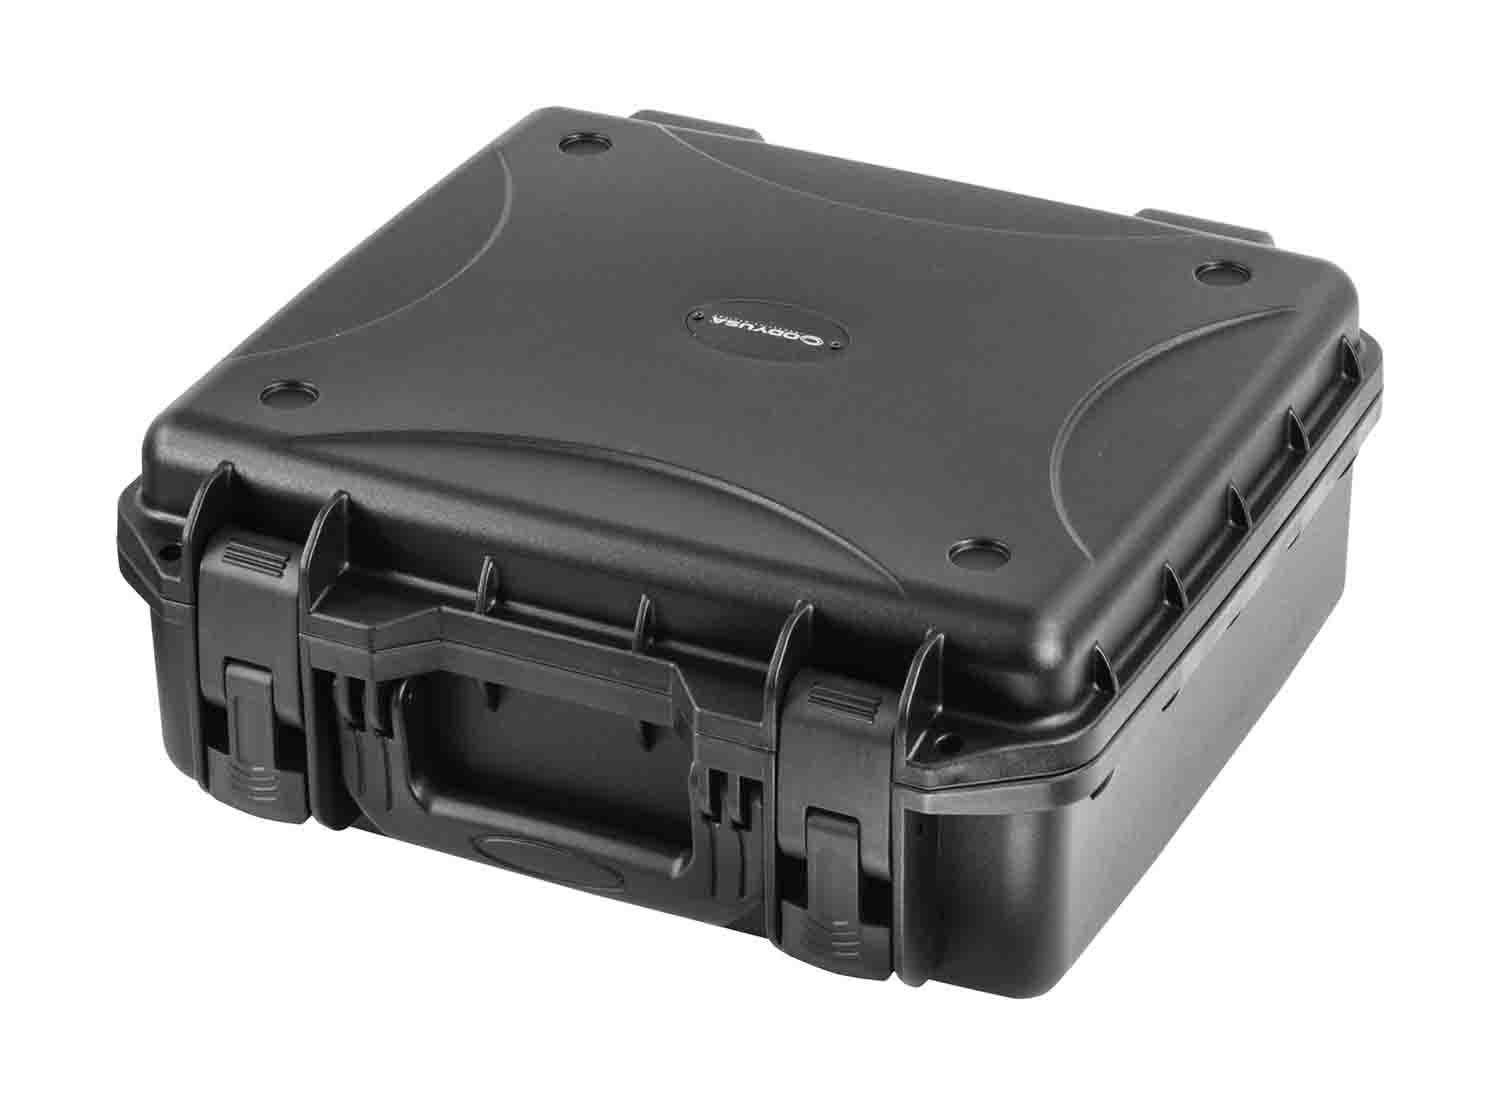 Odyssey VU120905 Vulcan Injection-Molded Utility Case with Pluck Foam - 13.75 x 11.75 x 3.75" Interior - Hollywood DJ